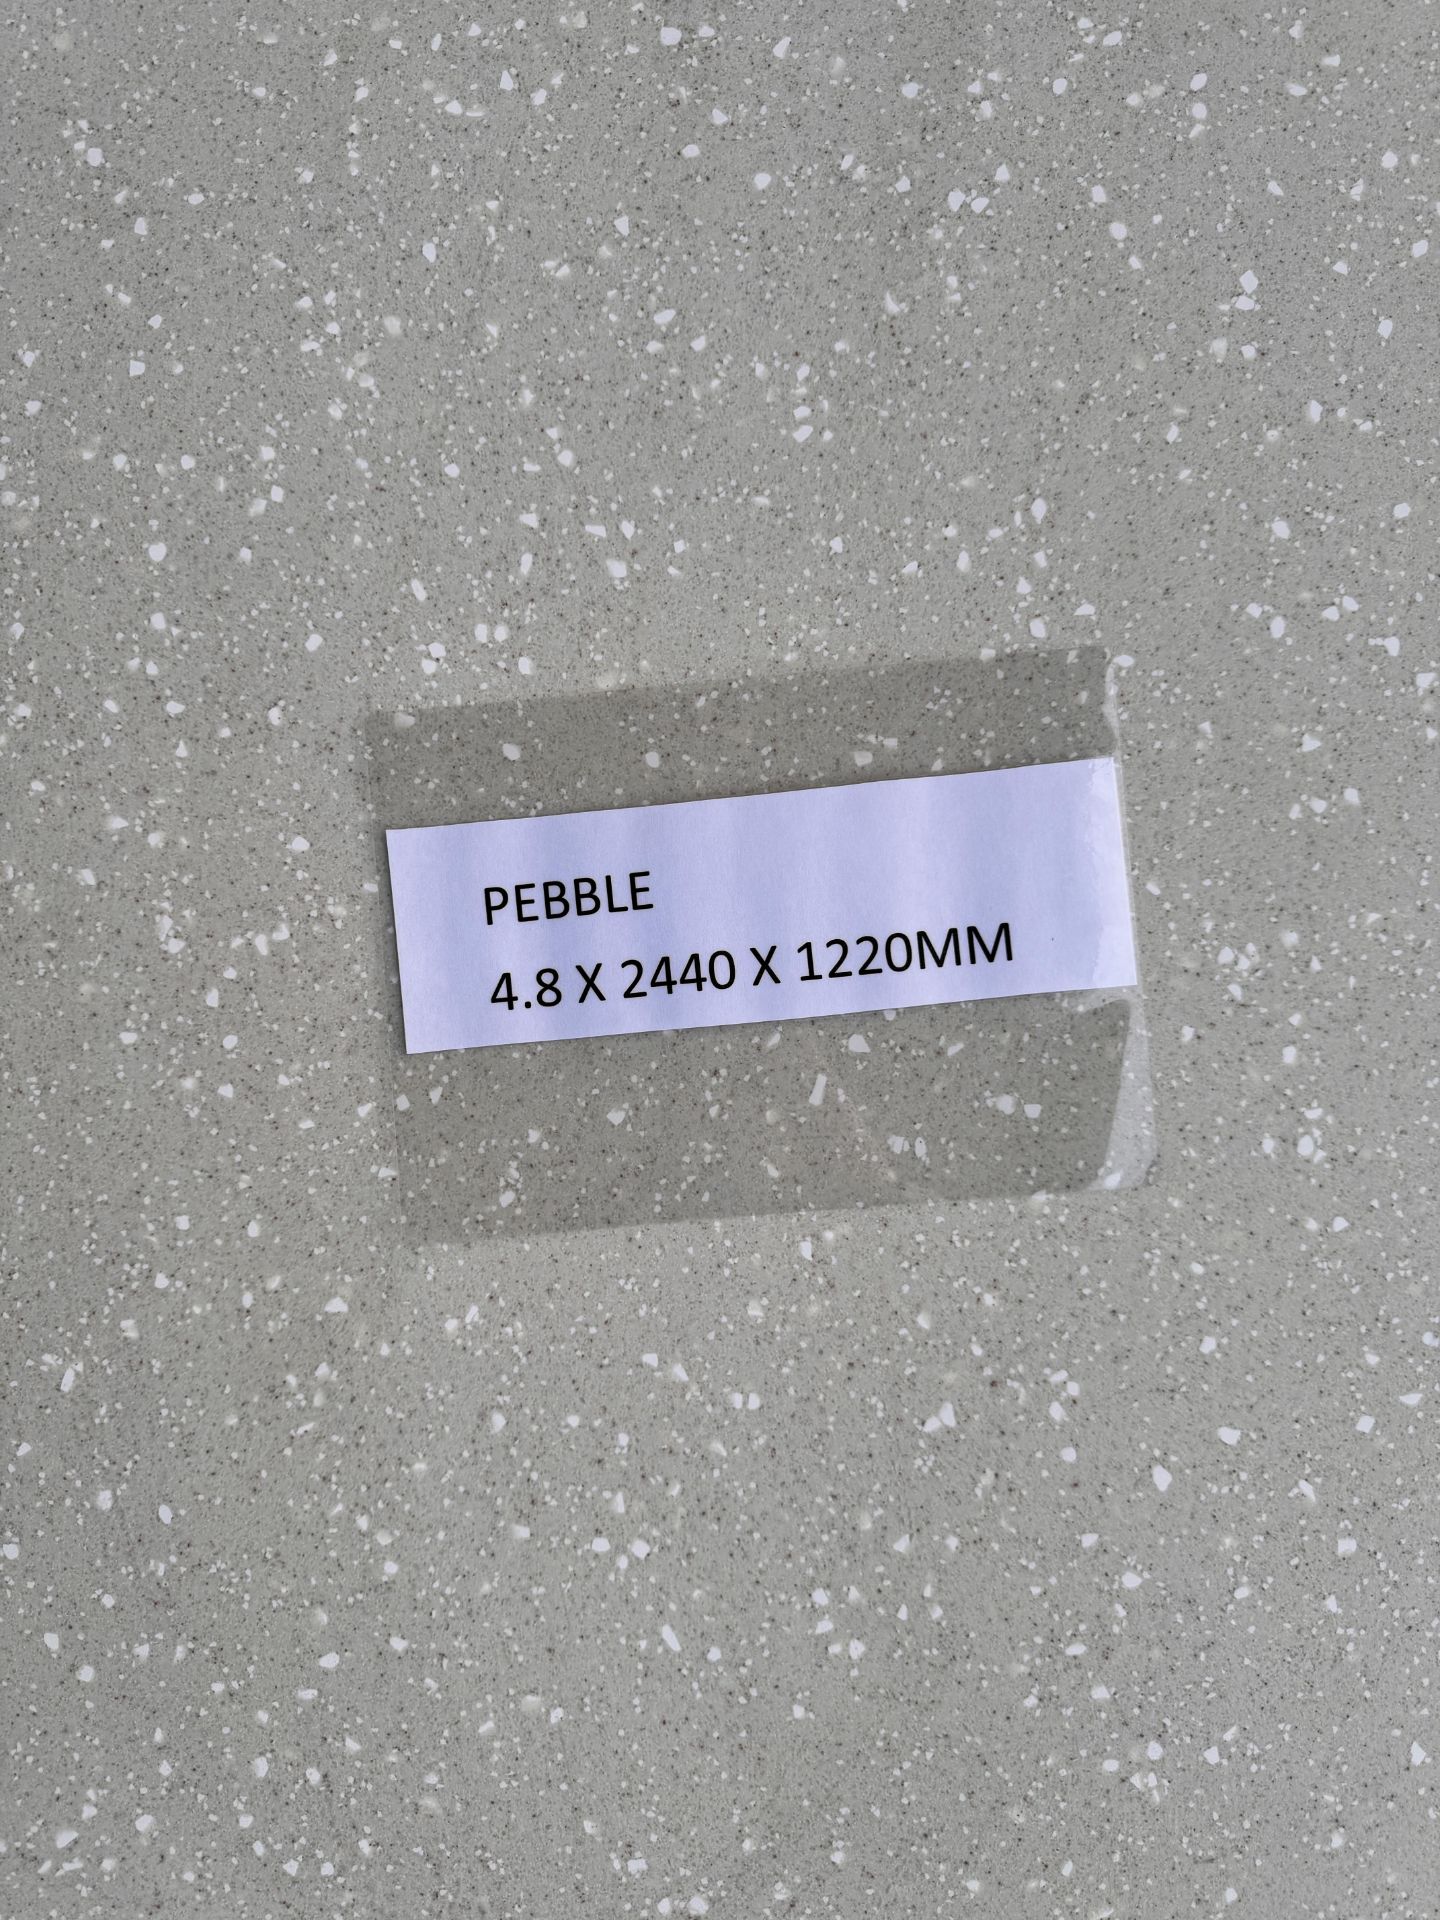 X5 Decorative Acrylic Wall Panel Sheets - Colour: Pebble - Size: 2440 x 1220 x 4.8mm - Image 2 of 2